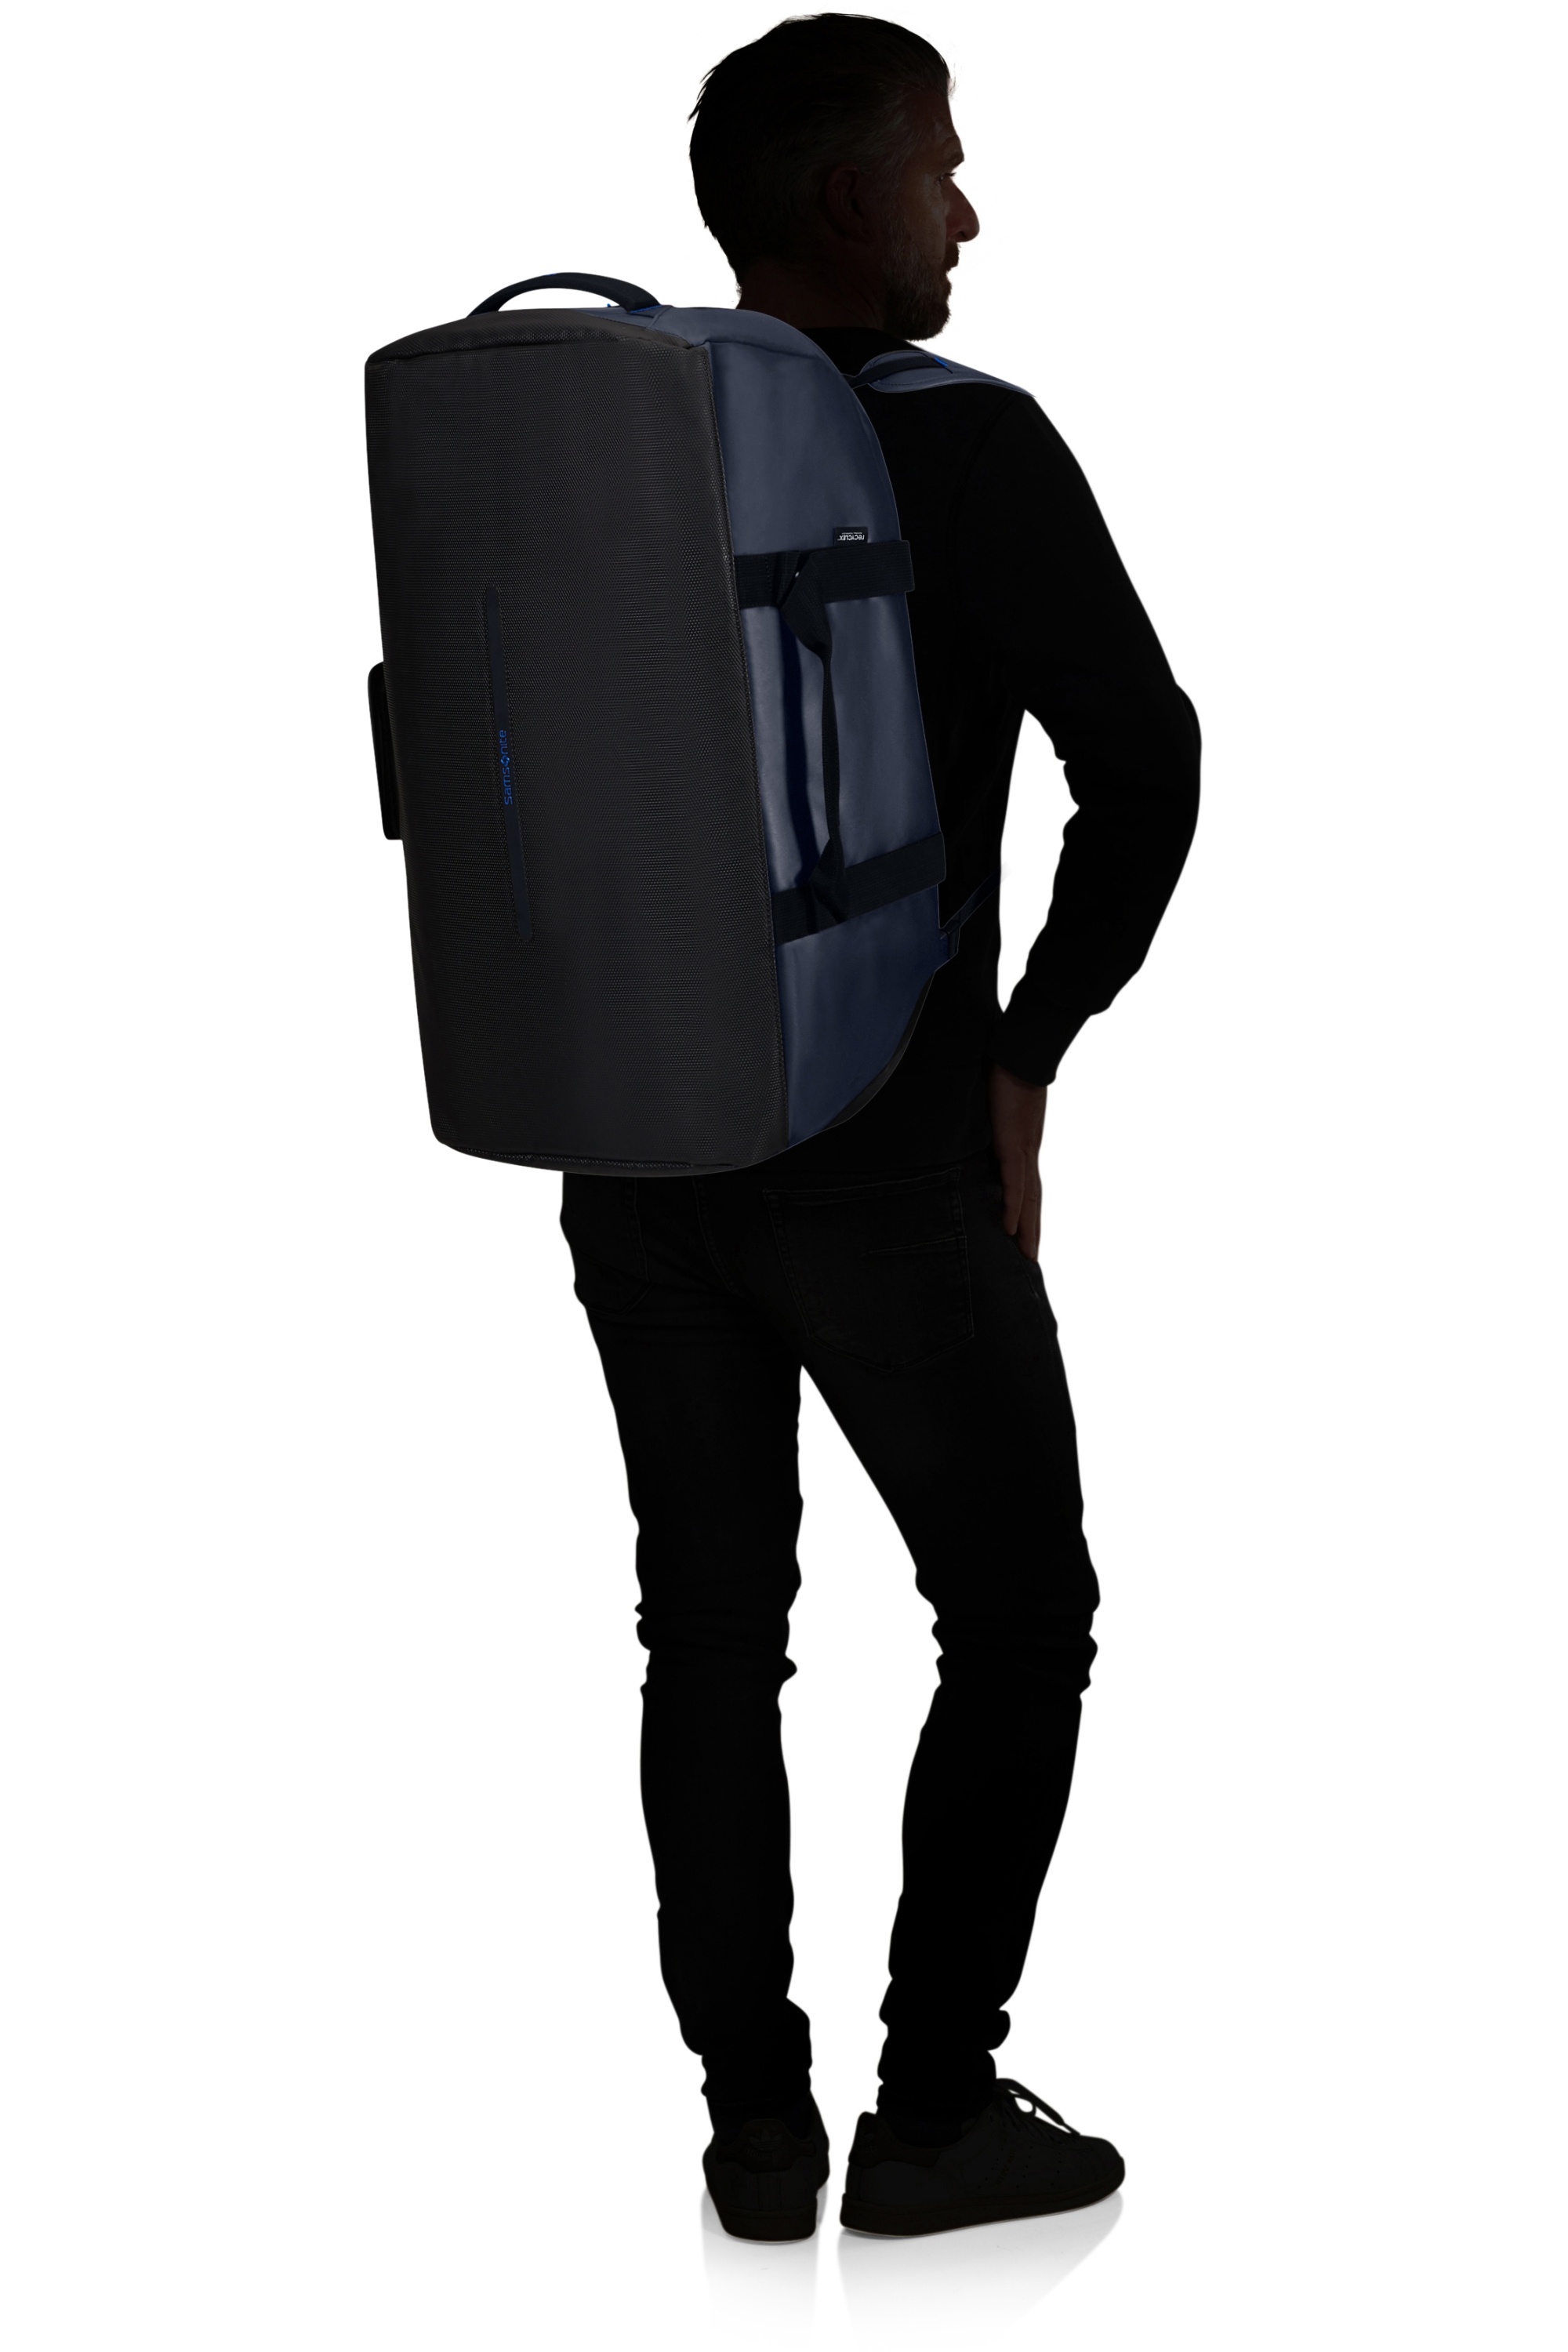 140876-2165-140876_2165_ecodiver_duffle_m_with%20silhouette-bbfd990e-5121-49d3-b860-ae6d00b8022a-png